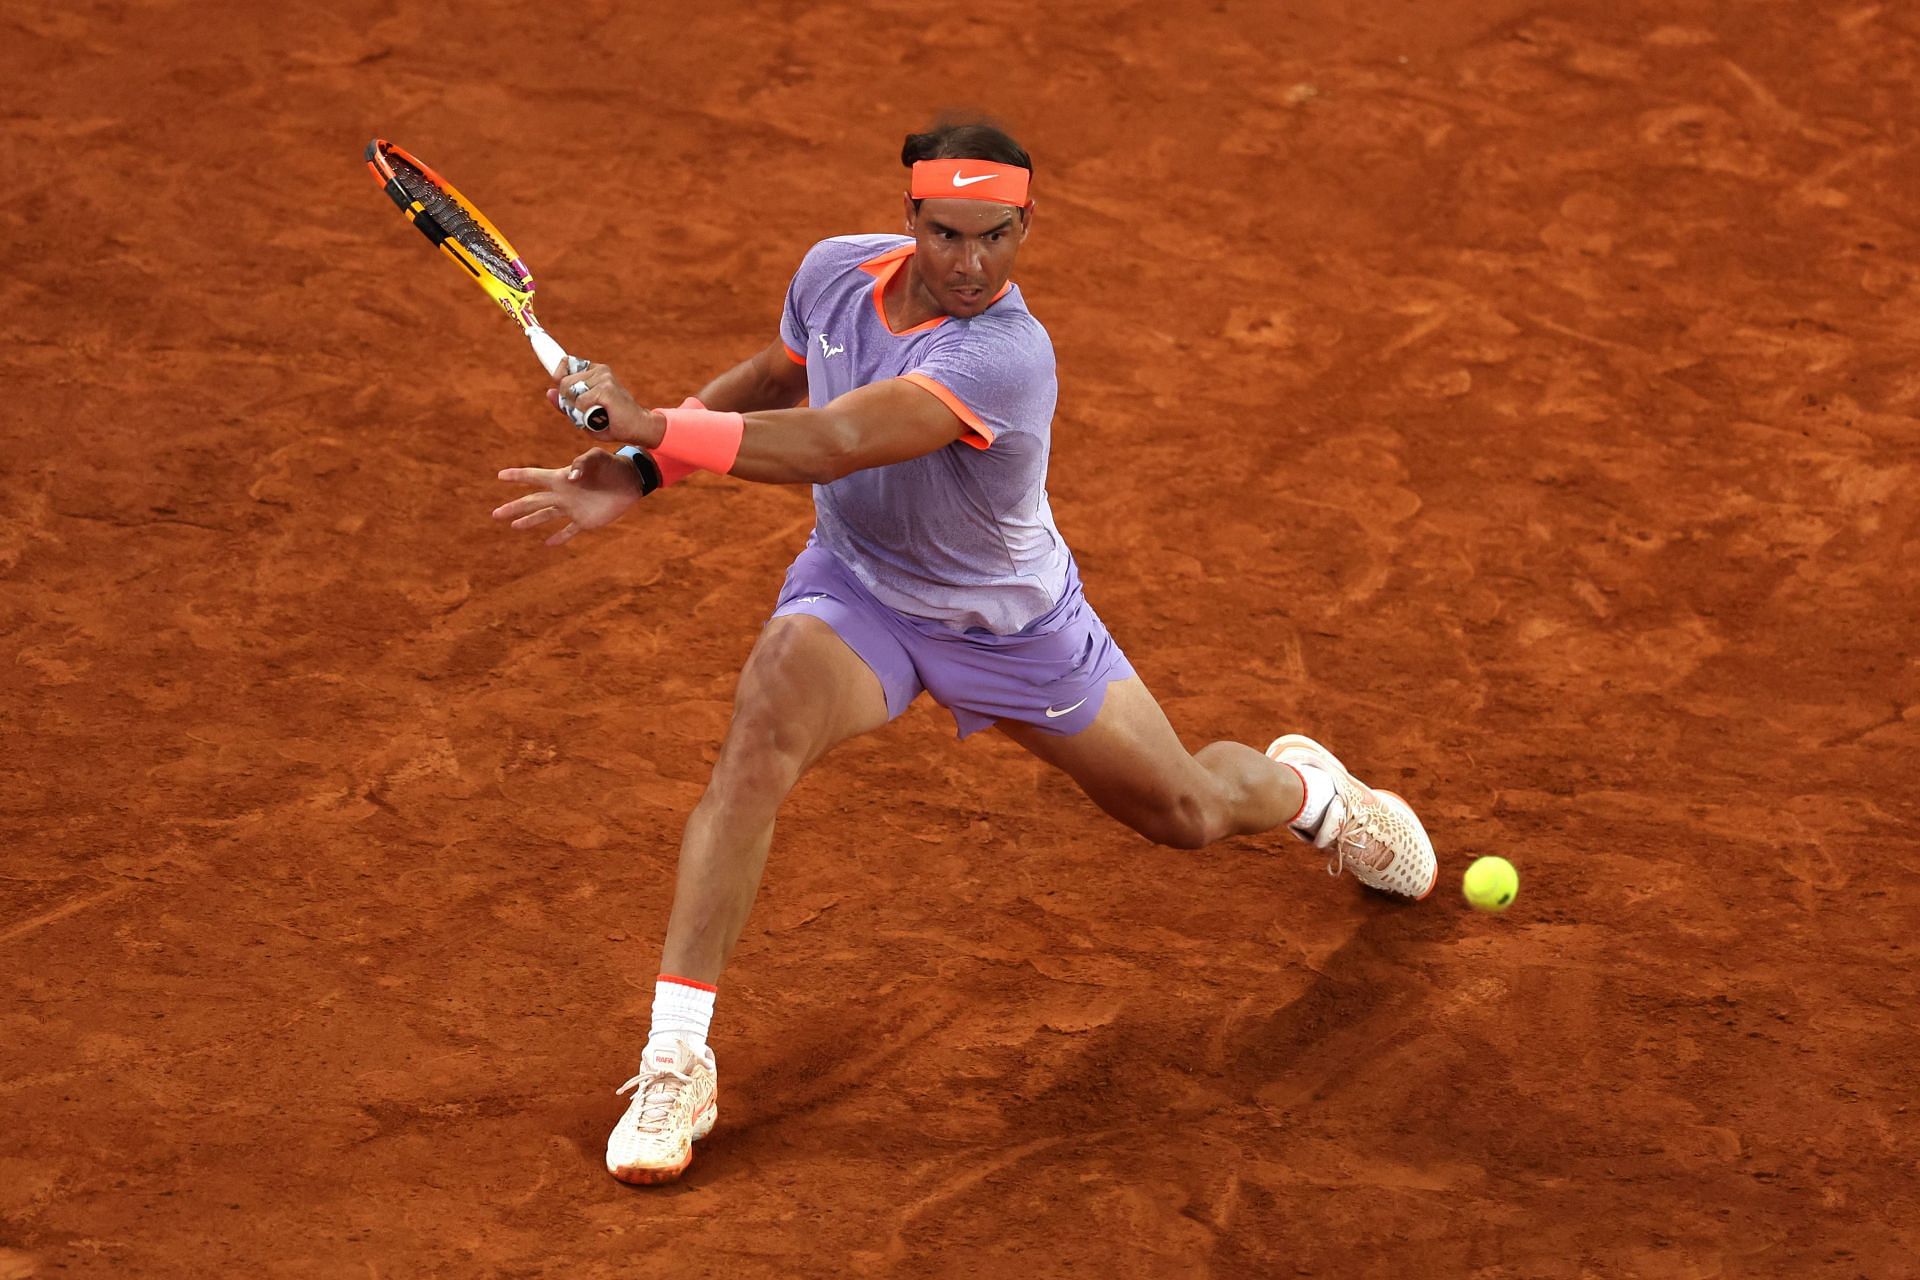 The Spaniard in action at the Madrid Open